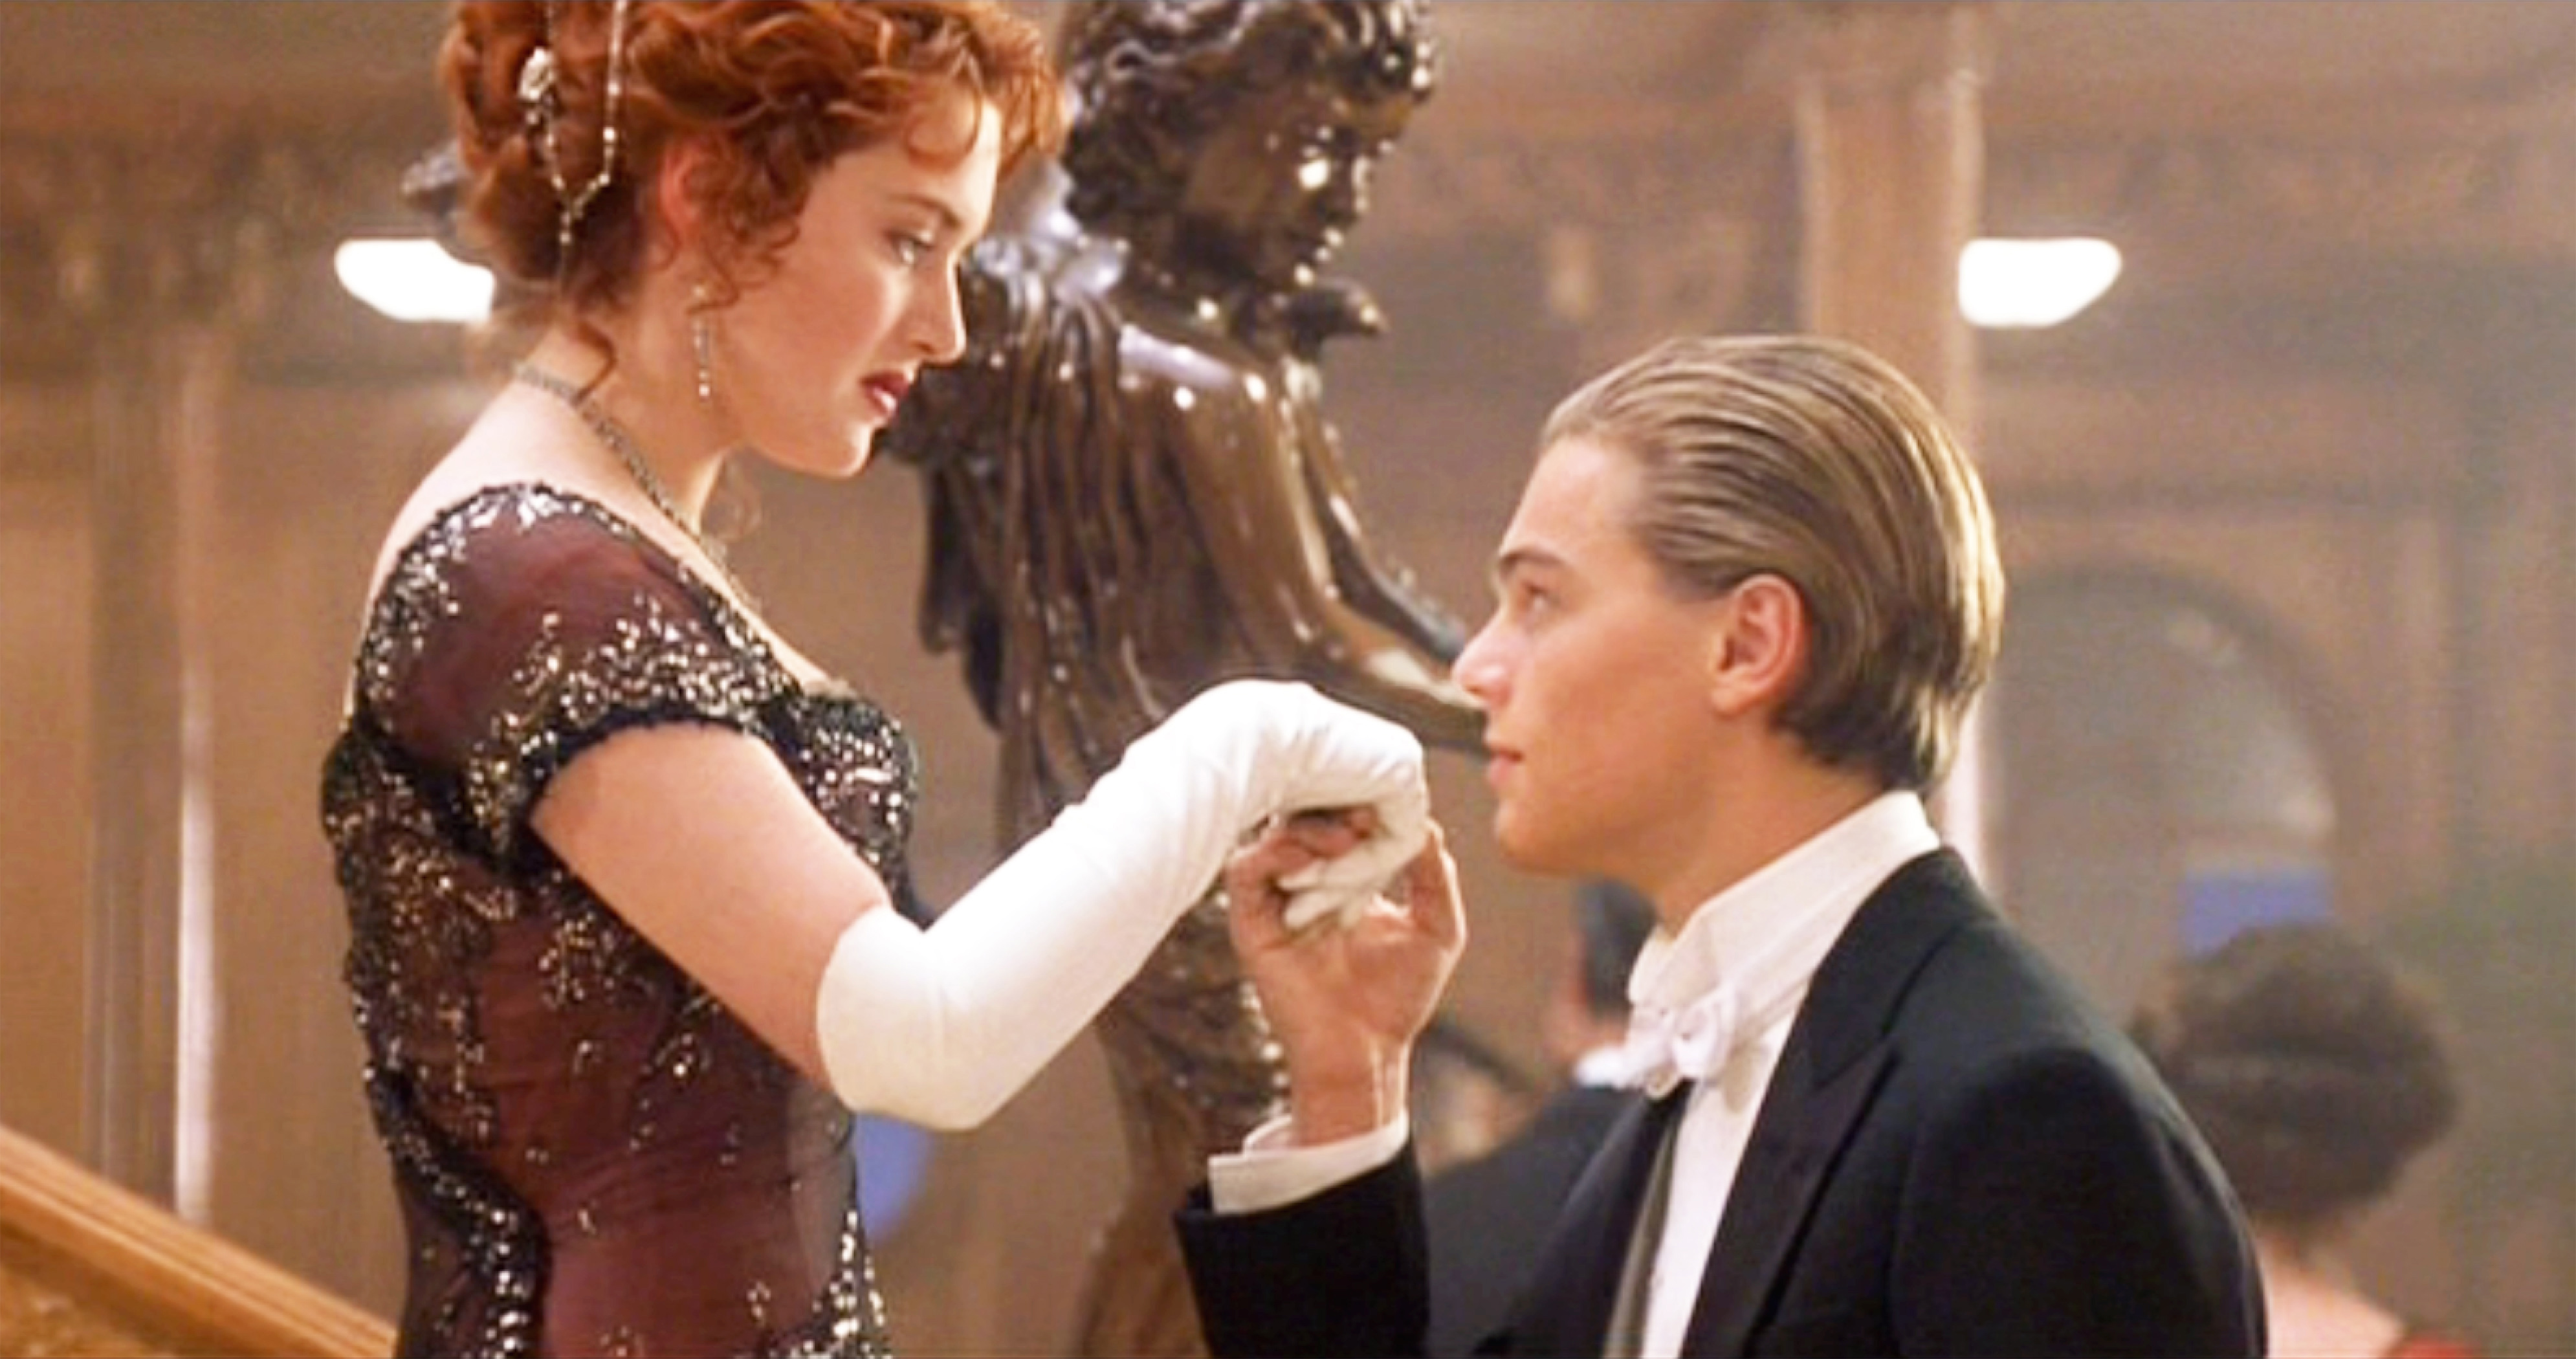 Seen here from left, Kate Winslet as Rose and Leonardo DiCaprio as Jack. Initial USA theatrical wide release December 19, 1997.